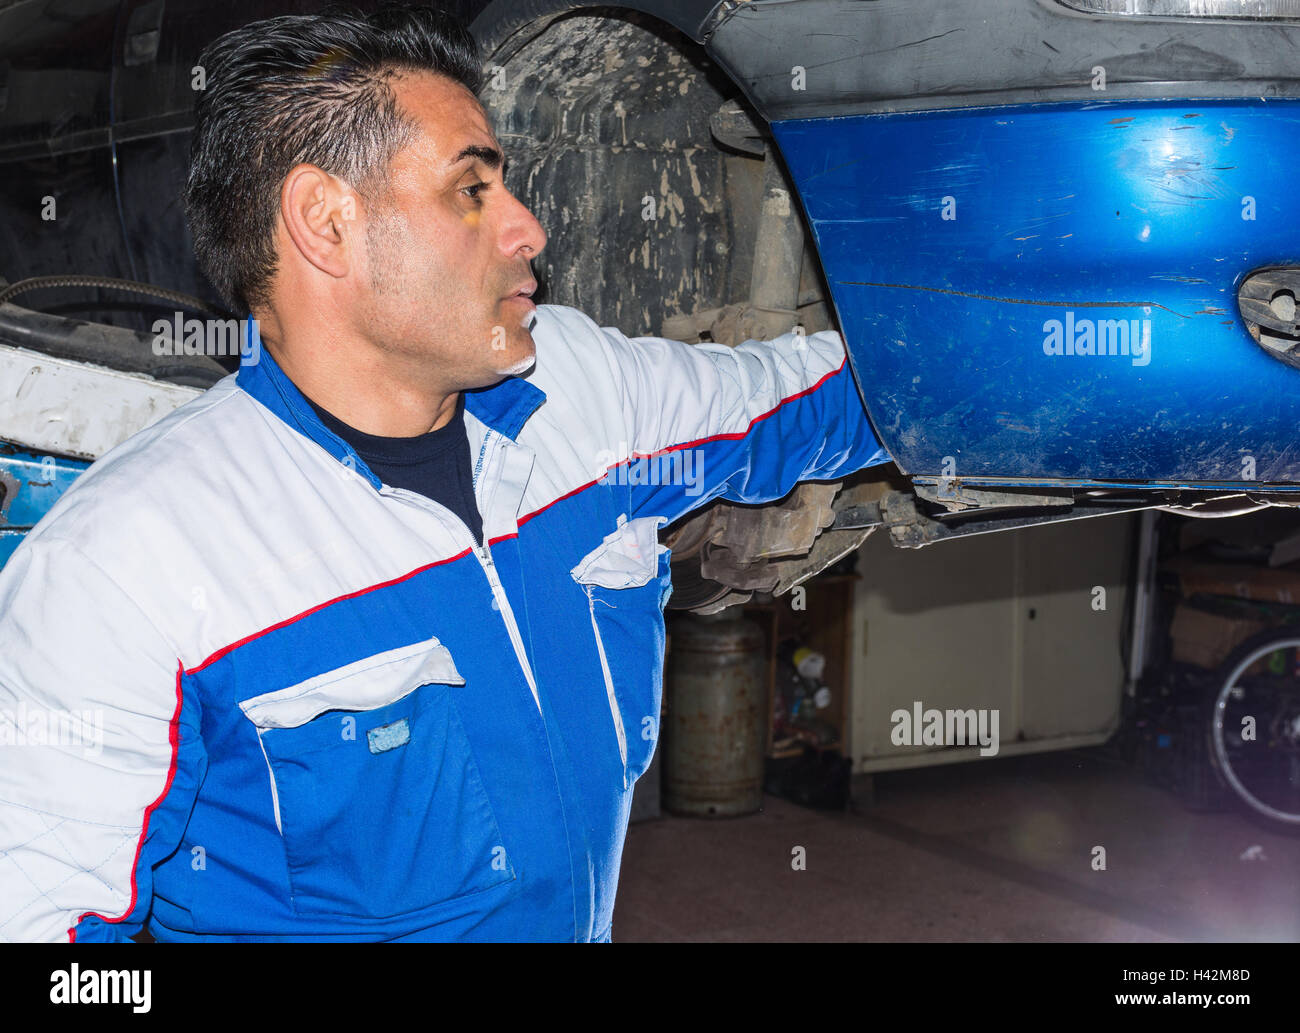 Car mechanic fixing an engine in his garage. copy space. Stock Photo